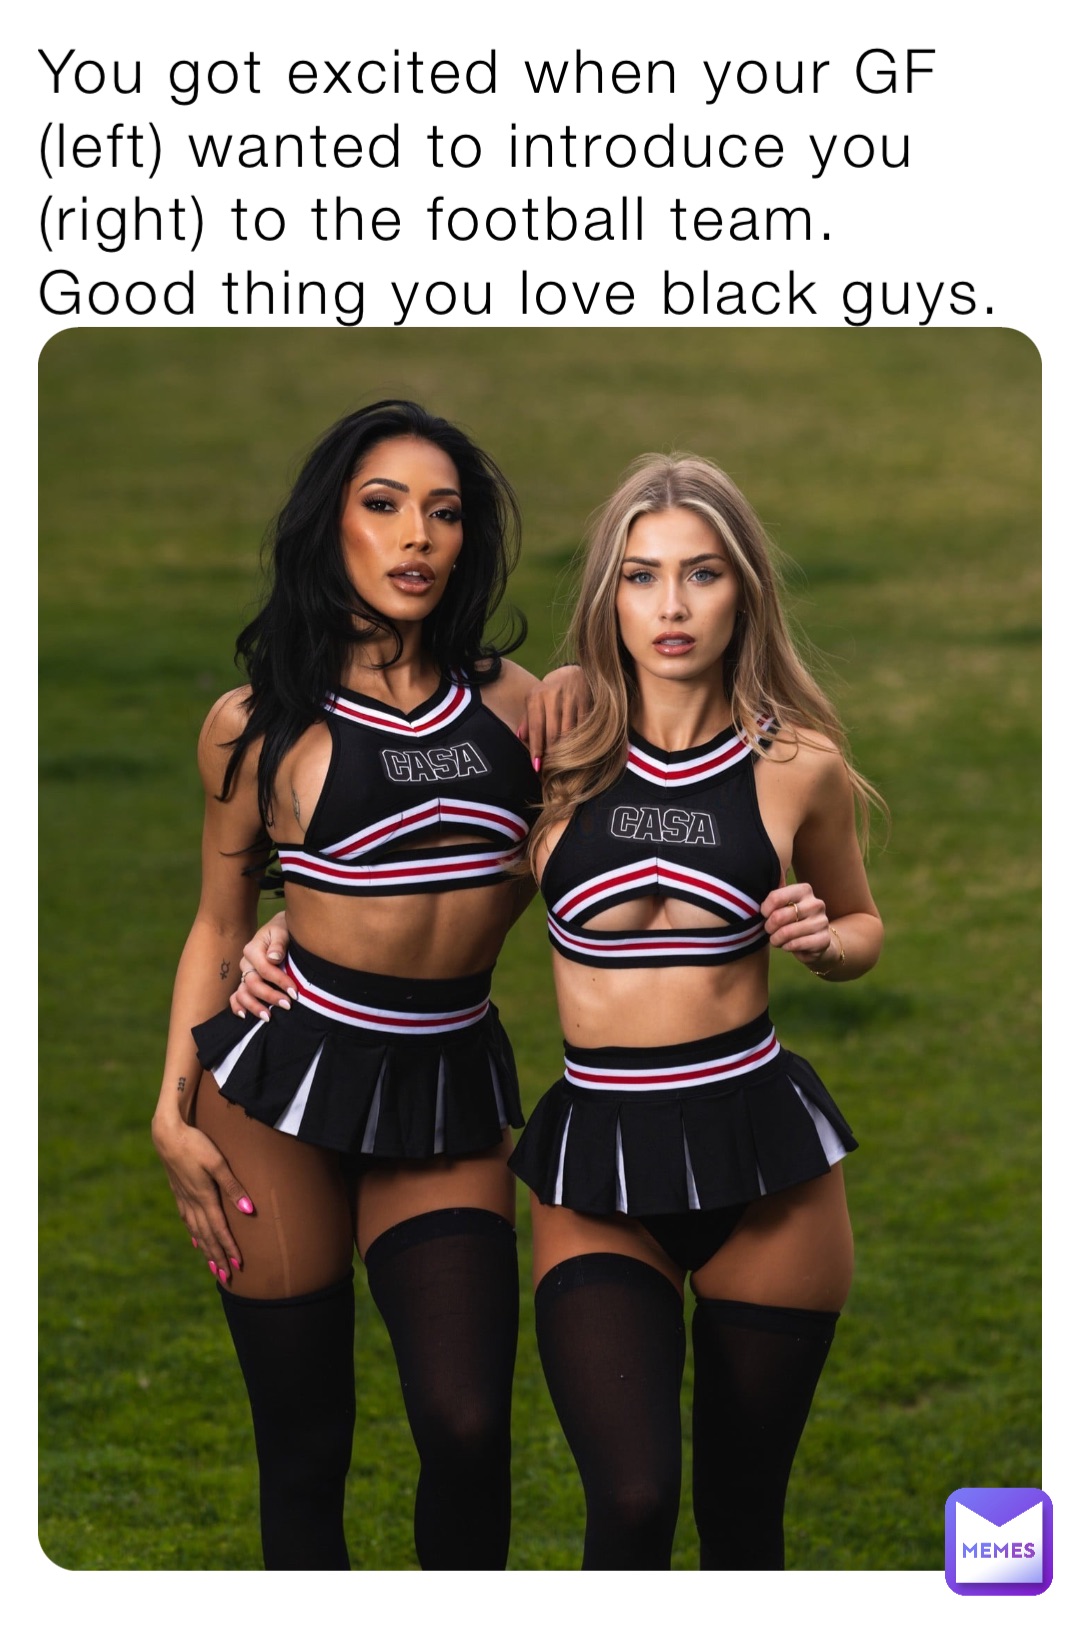 You got excited when your GF (left) wanted to introduce you (right) to the football team. Good thing you love black guys.